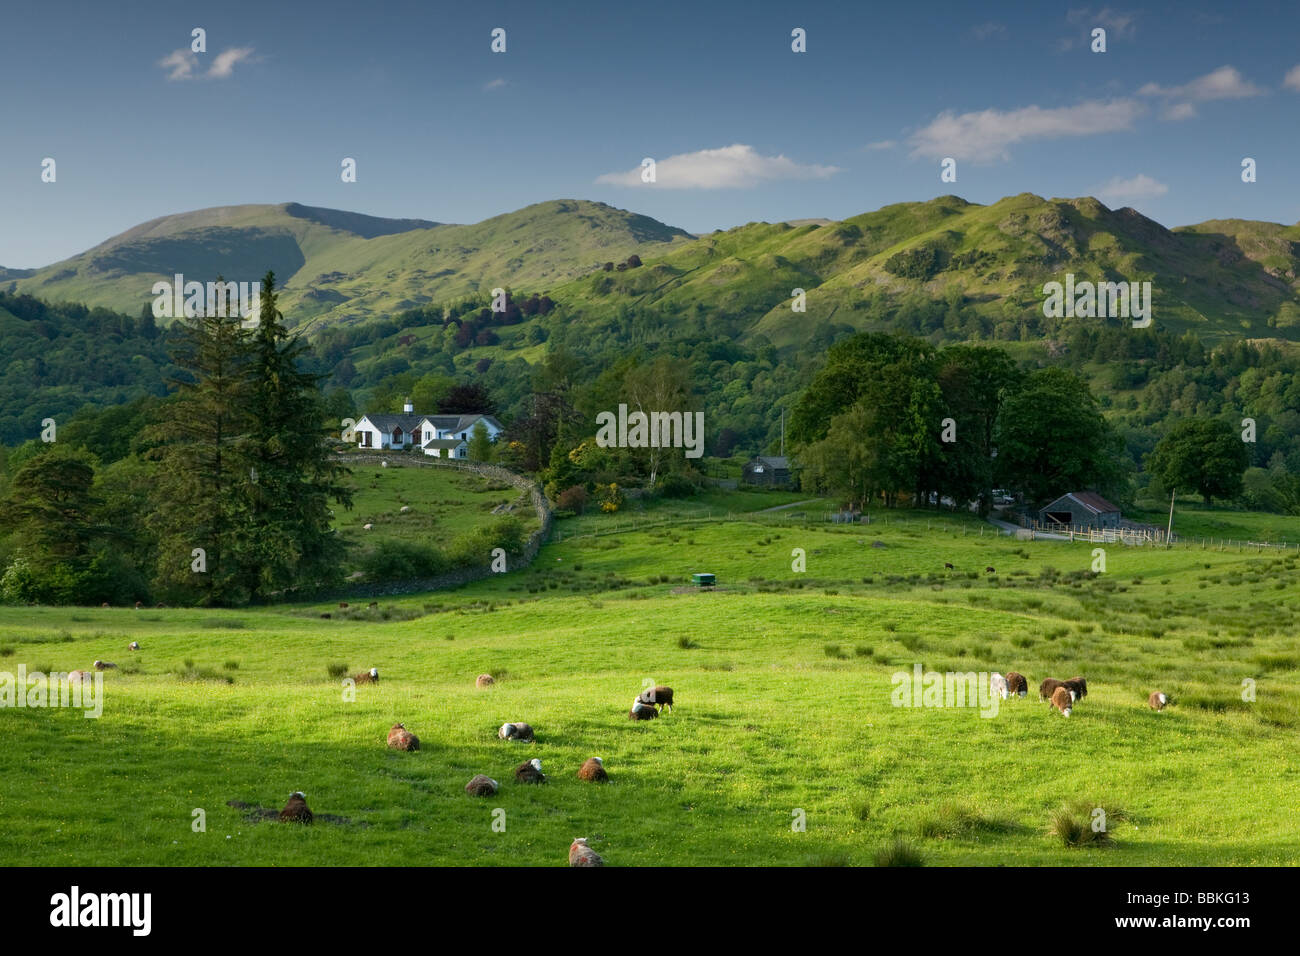 Looking towards the Langdale Hills from near Skelwith Bridge with sheep grazing in a field Stock Photo